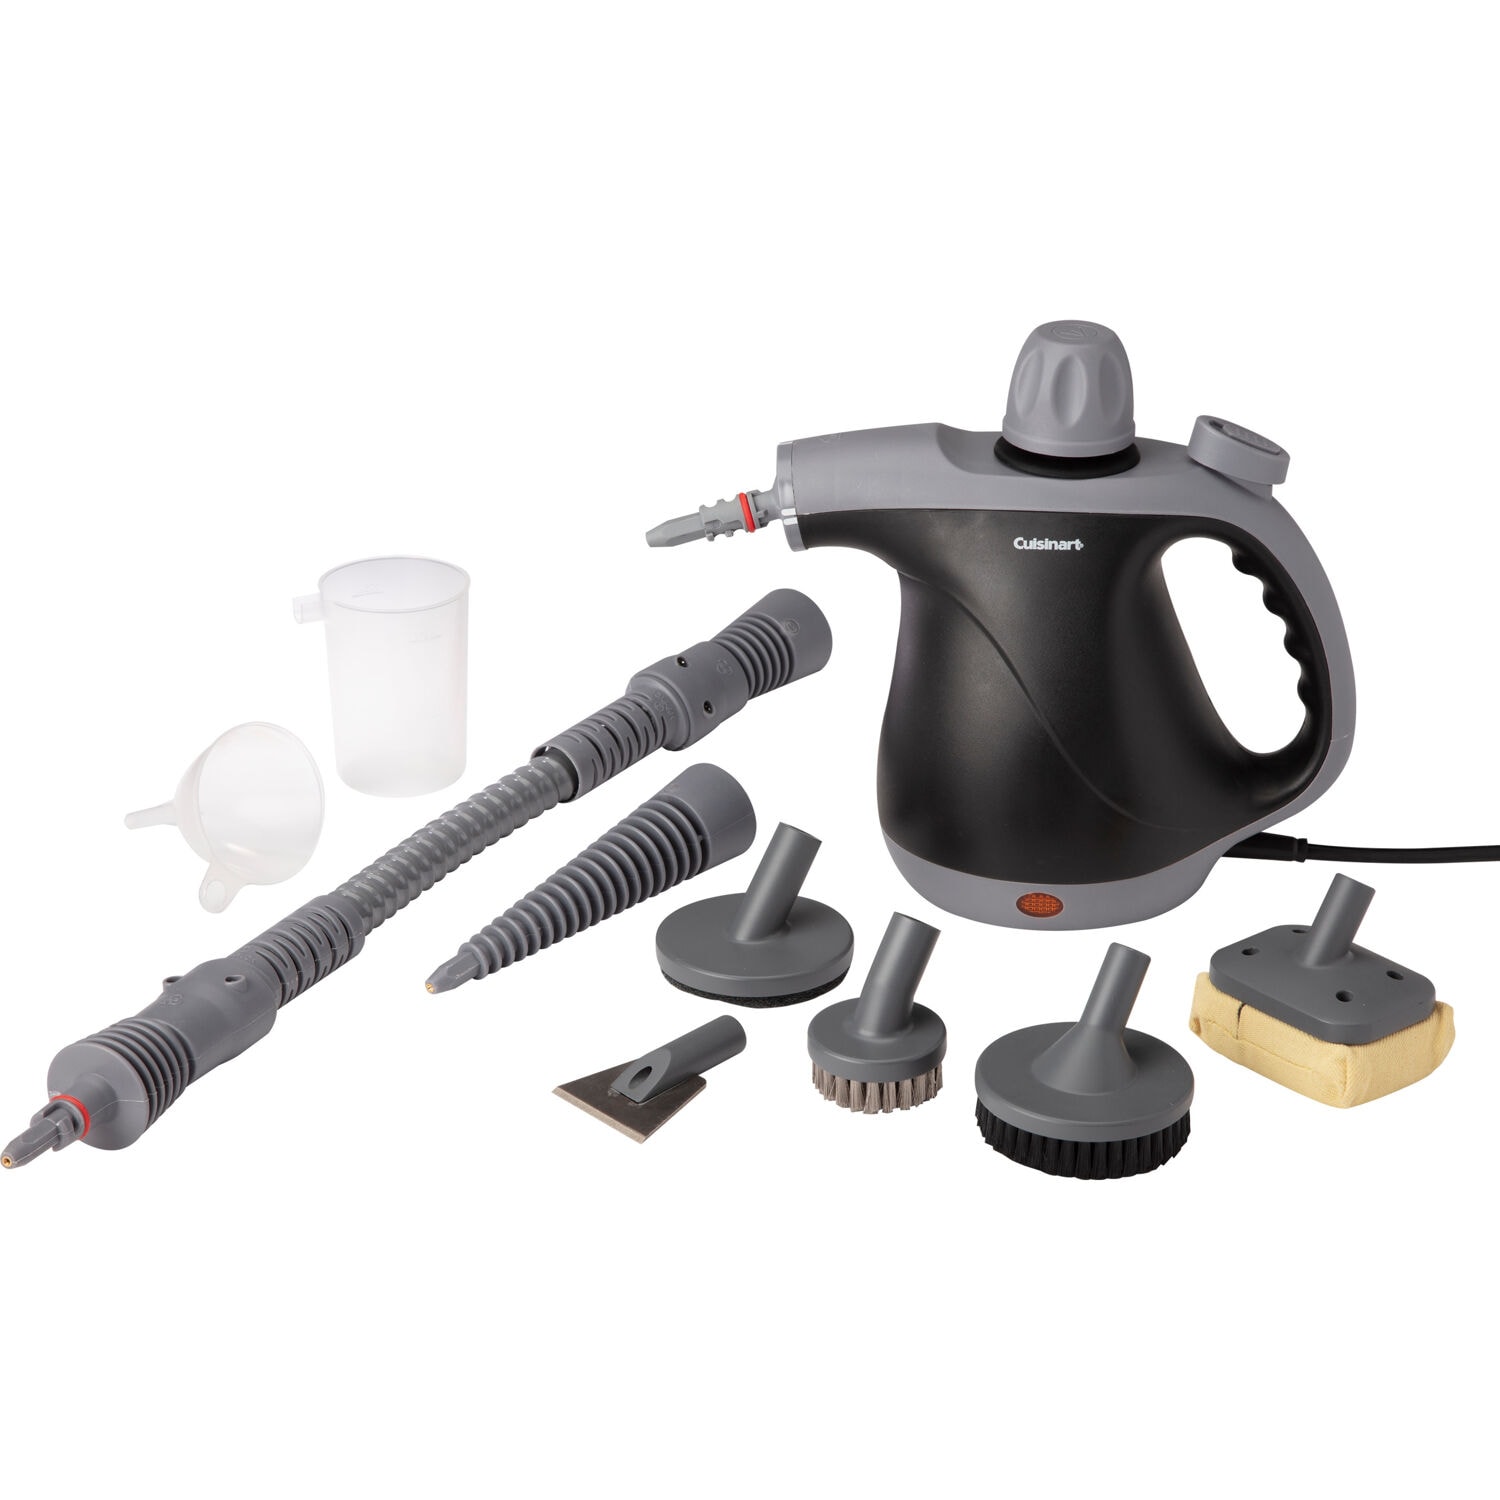 Working with Appliance Repair Tools like the Steam Cleaner